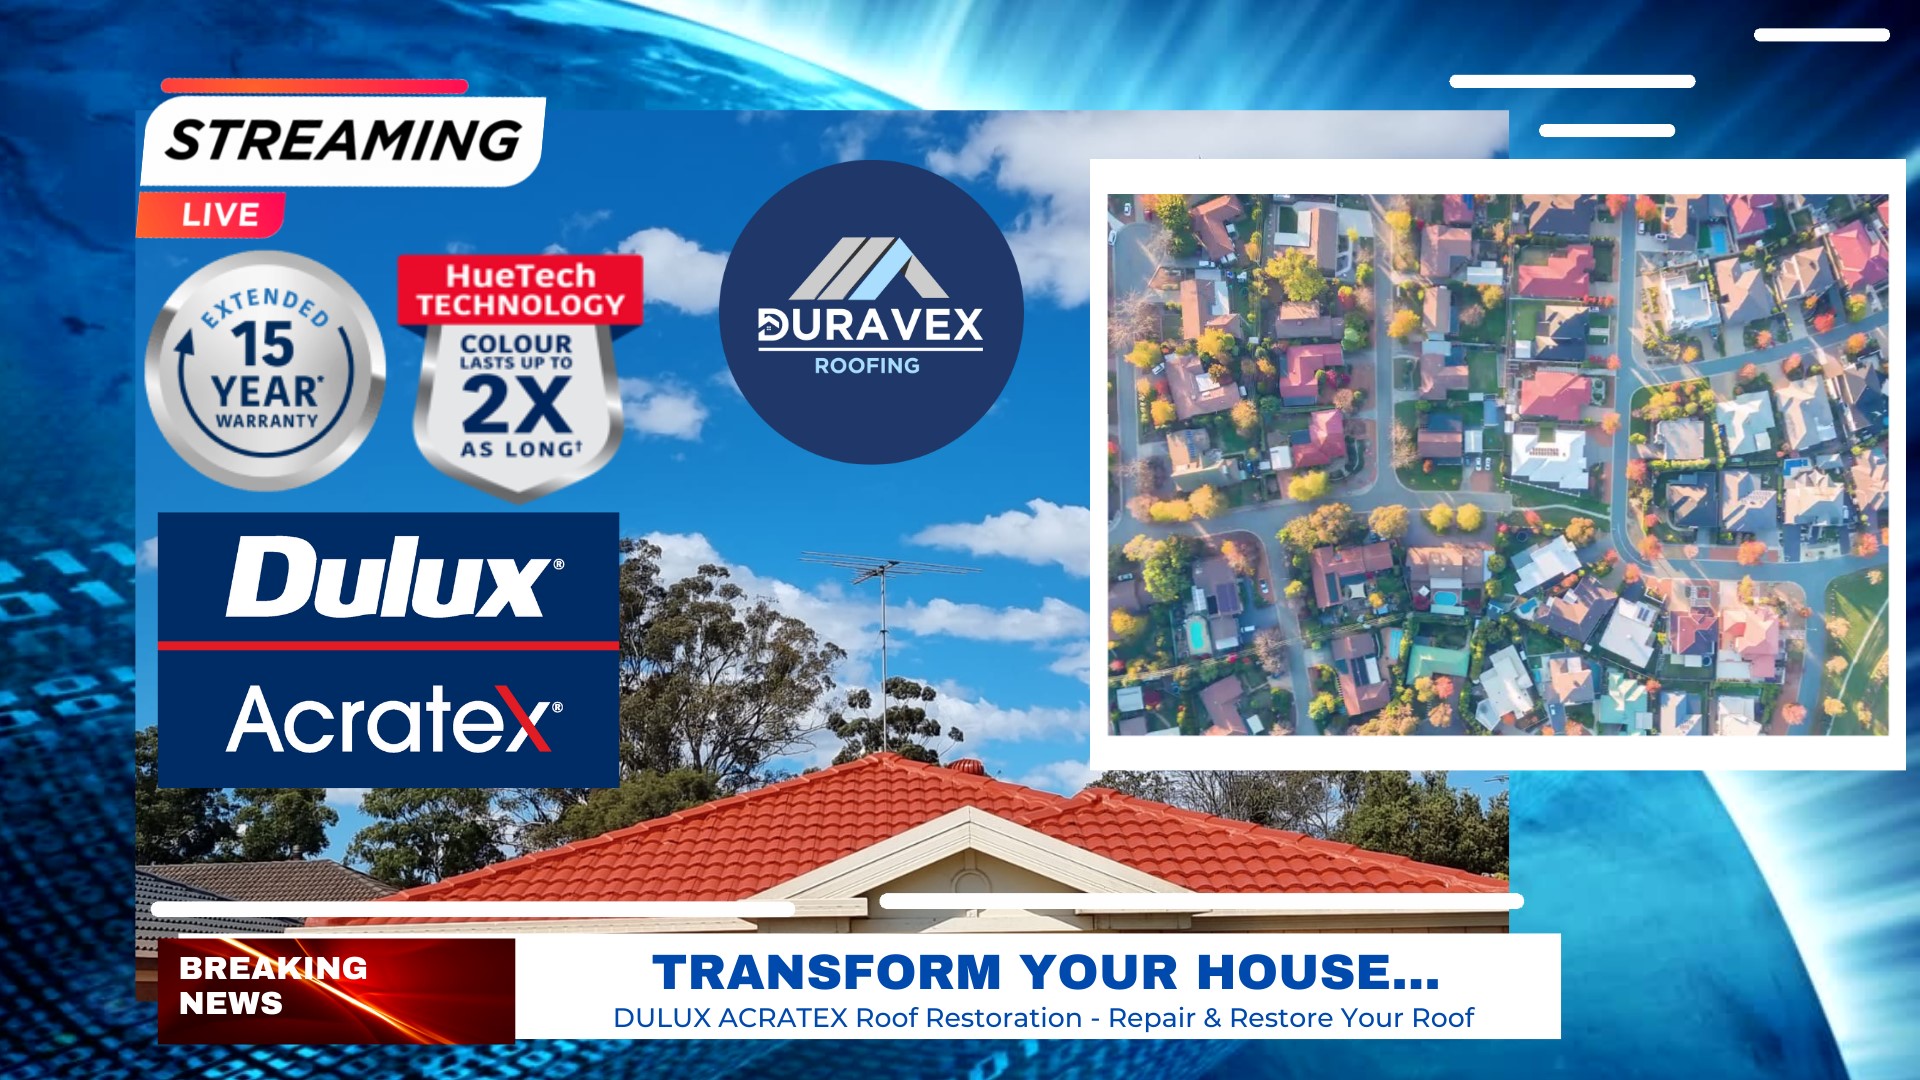 Expert Cement Tile Roof Restoration by Duravex Roofing